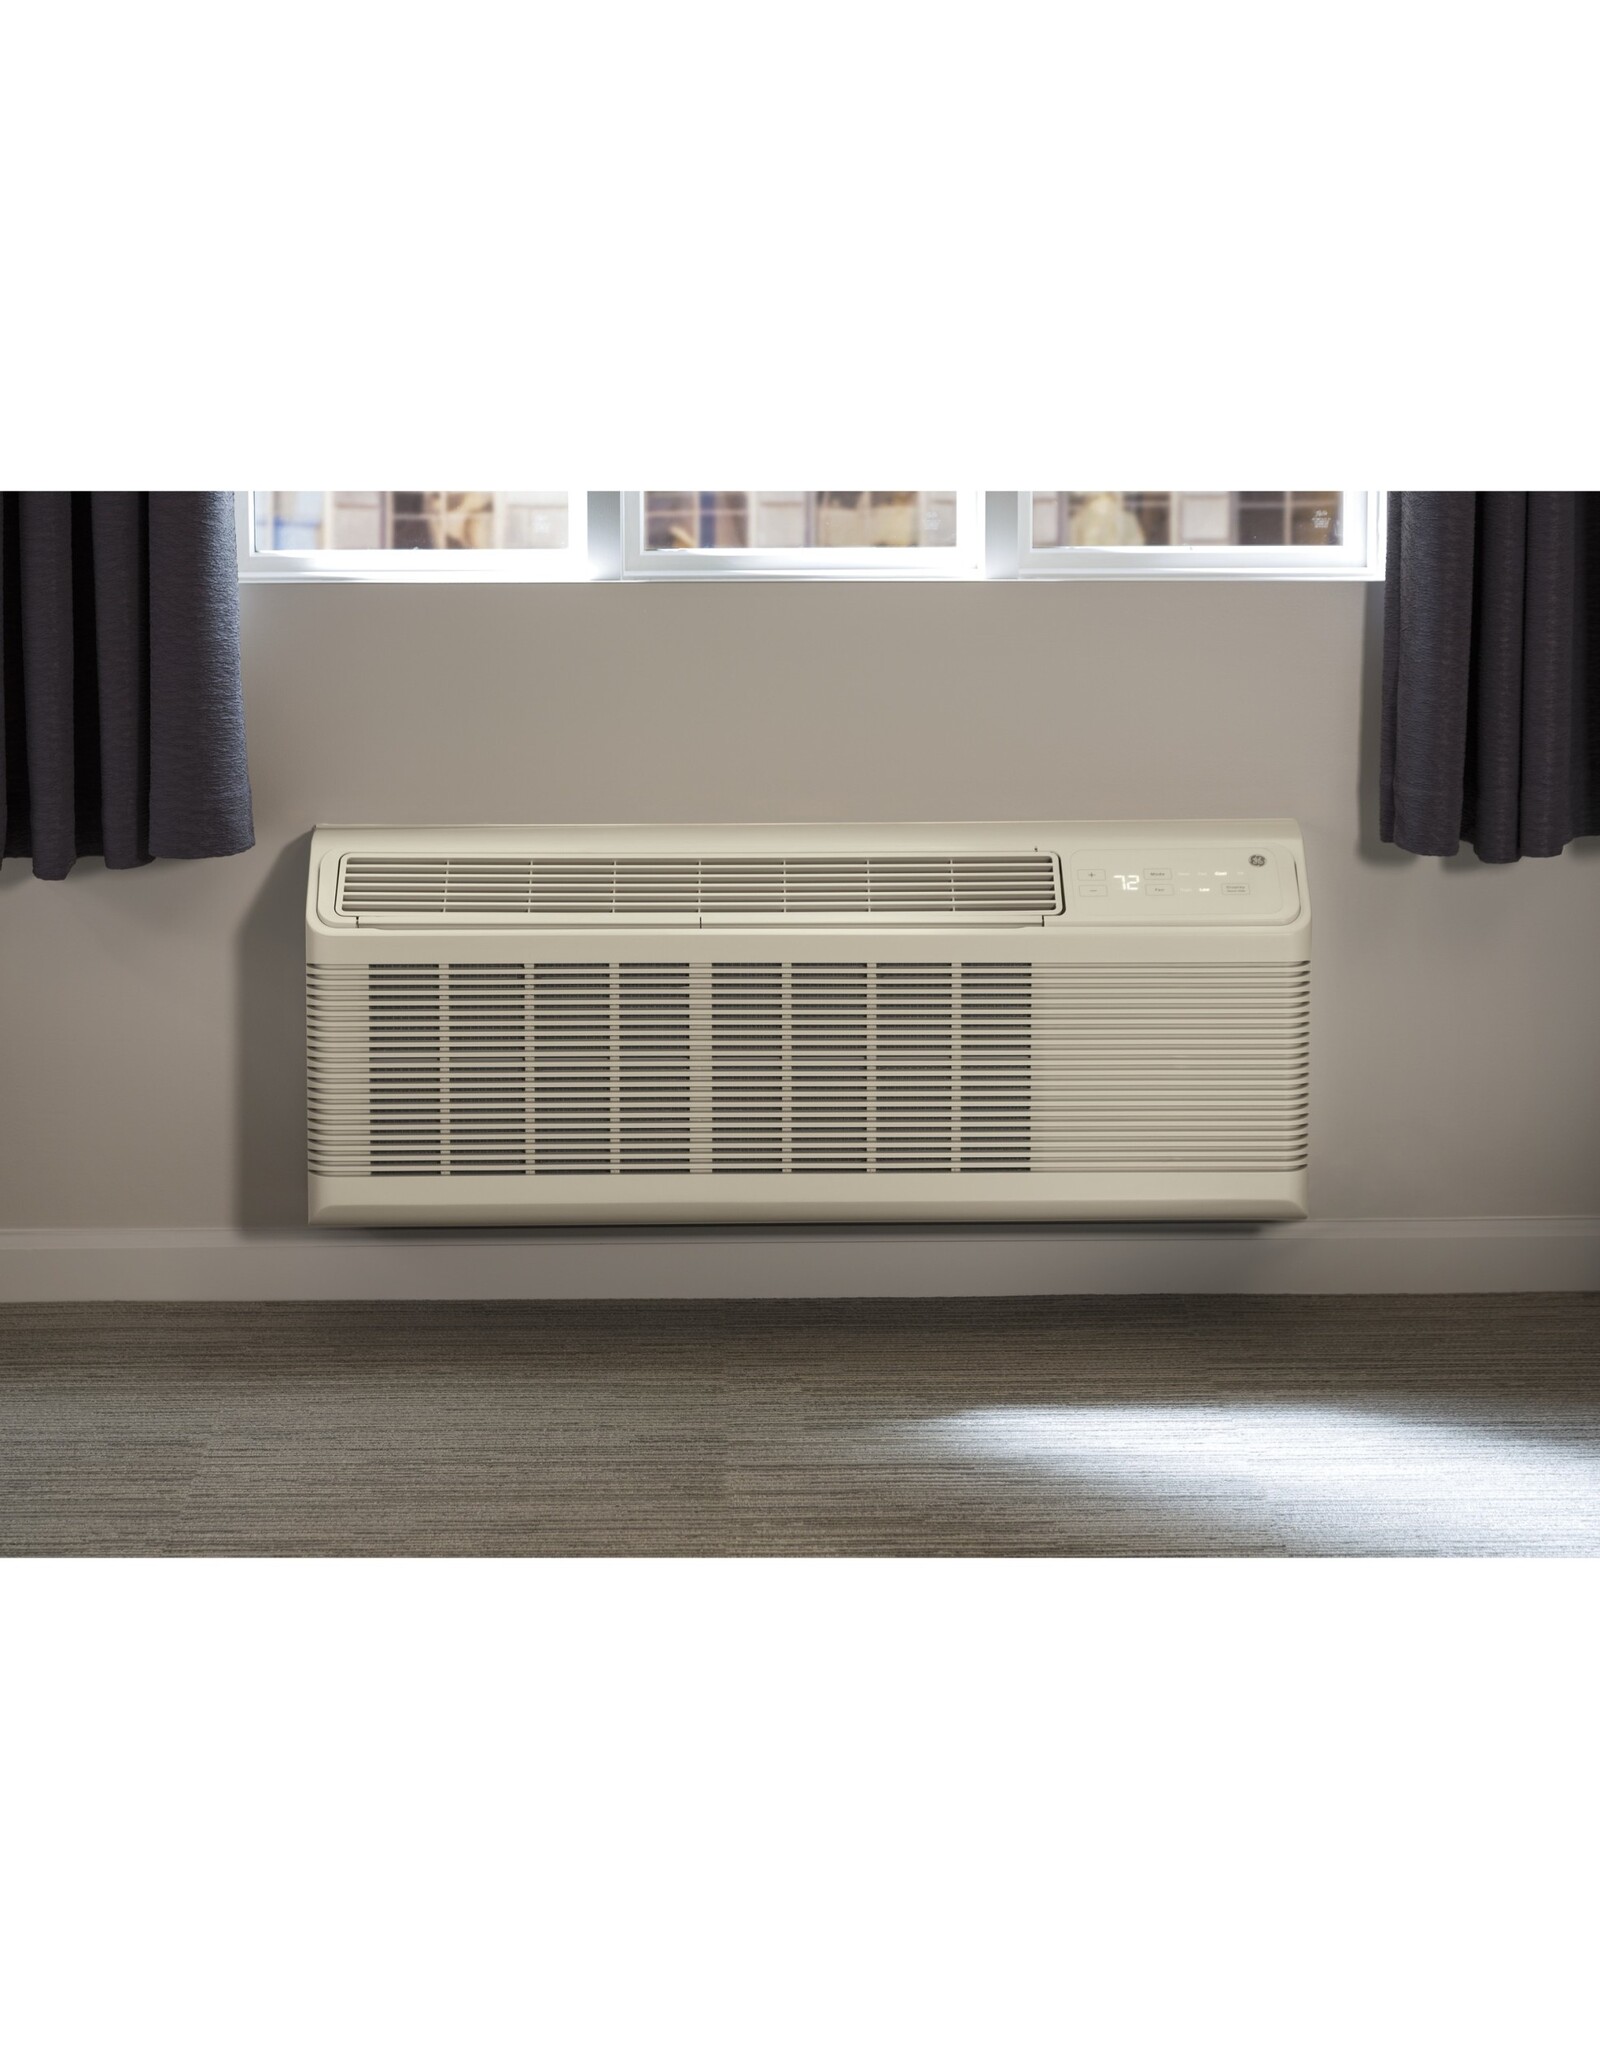 AZ65H12EAD 11,900 BTU Packaged Terminal Air Conditioner with 10,300 BTU Heat Pump and Electric Heat Backup, 11.7 EER, 3.7 Pints Per Hour Dehumidification, ICR, R410A Refrigerant and 265 Volt